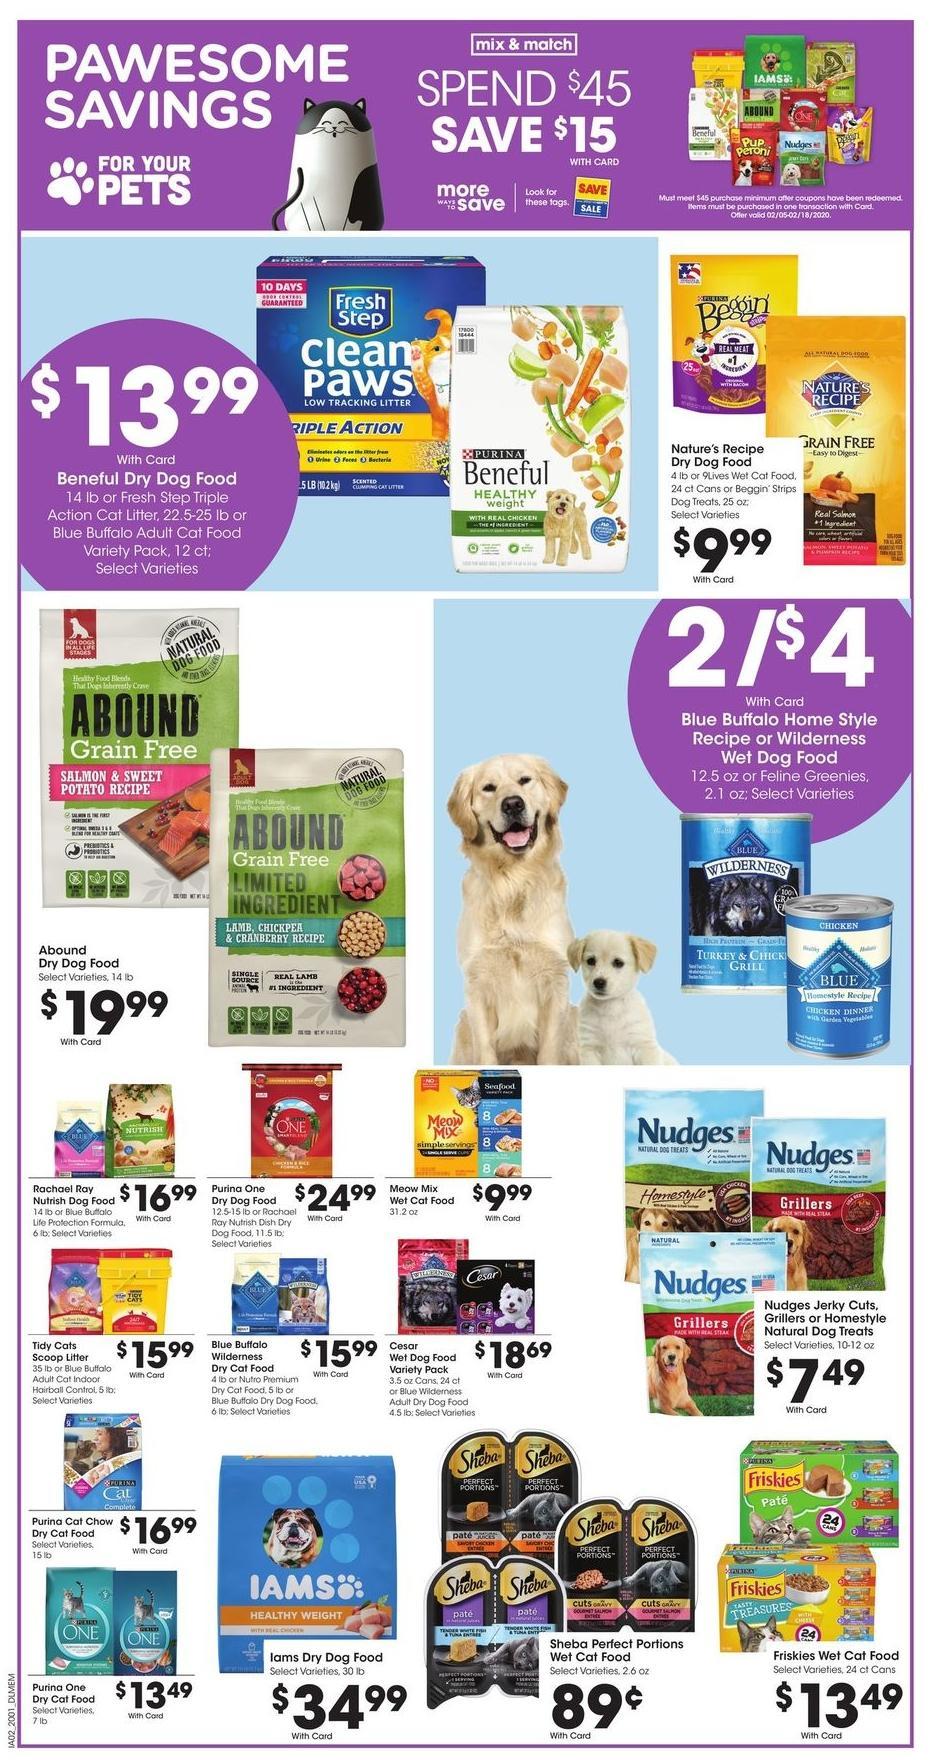 Kroger Weekly Ad from February 5